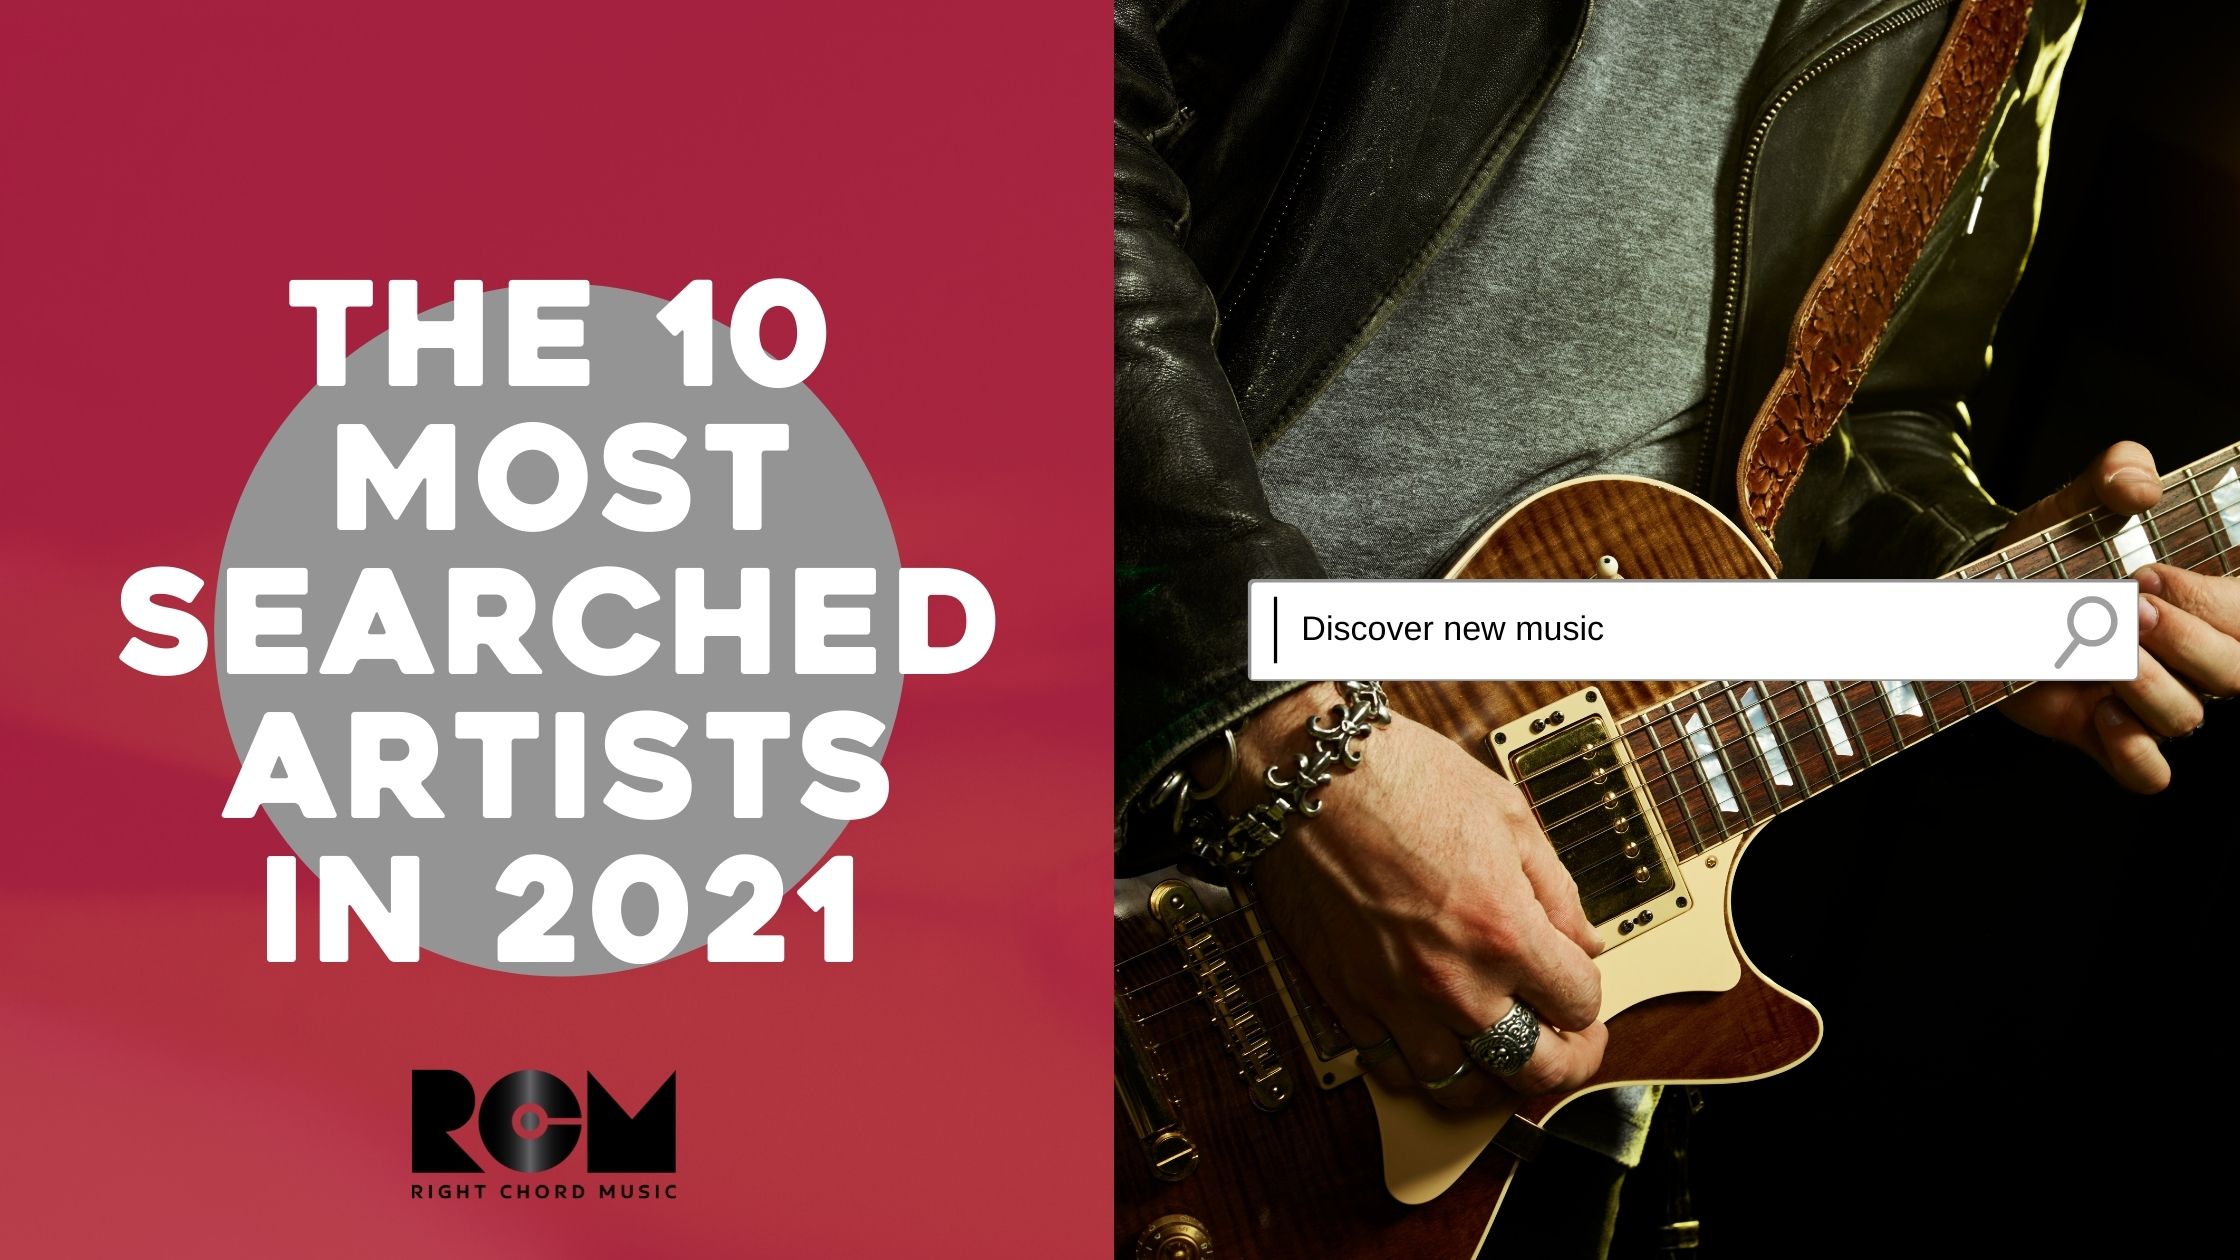 The 10 most searched artists in 2021 on RCM